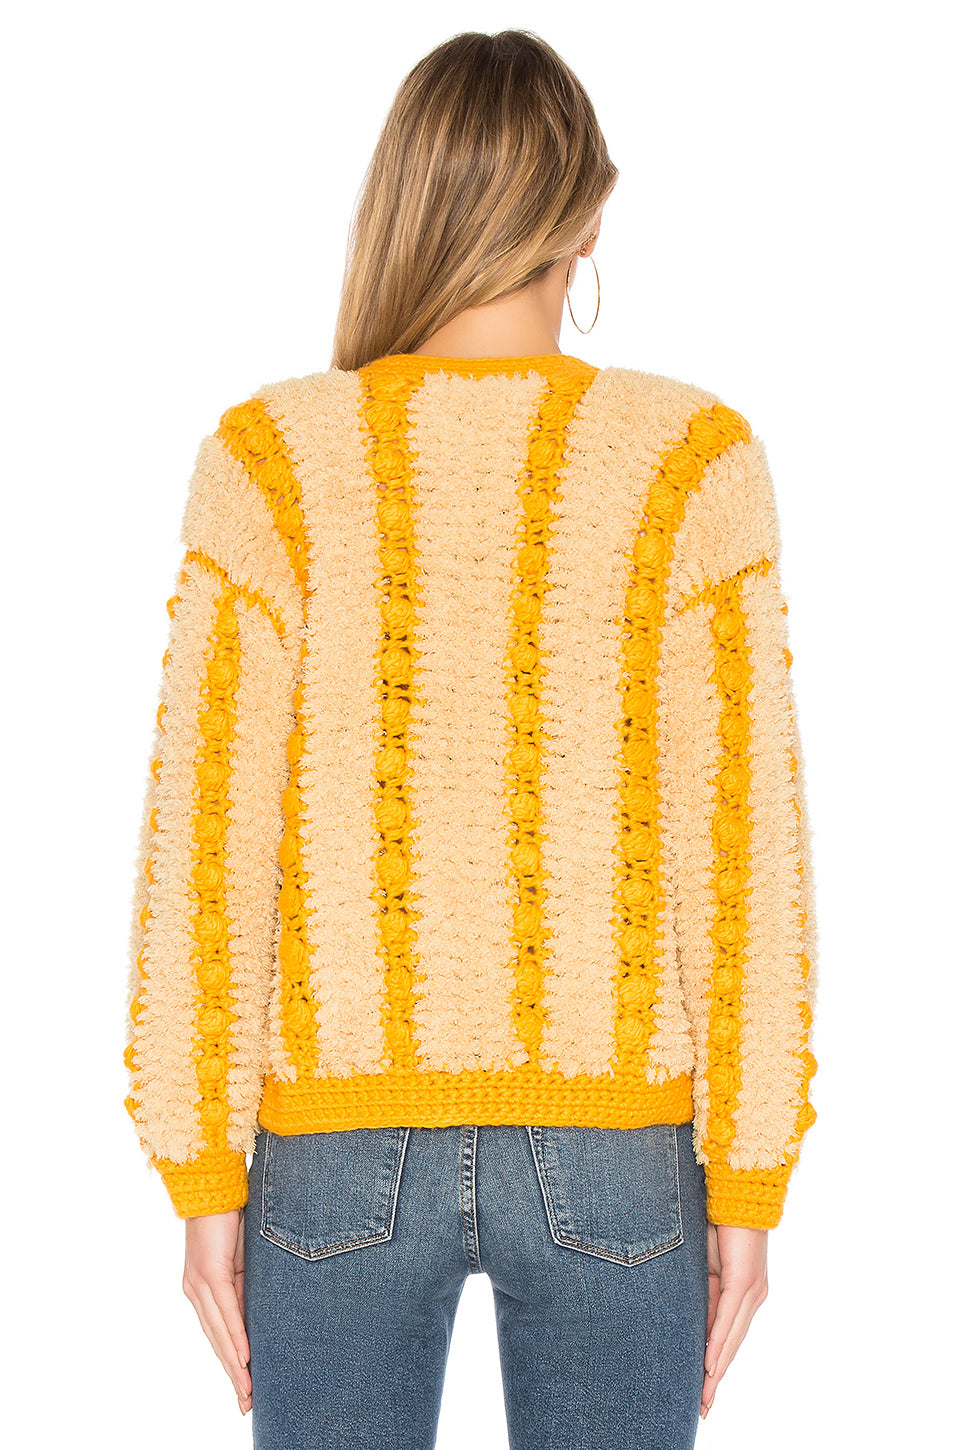 Morgana Sweater in BUTTERCUP